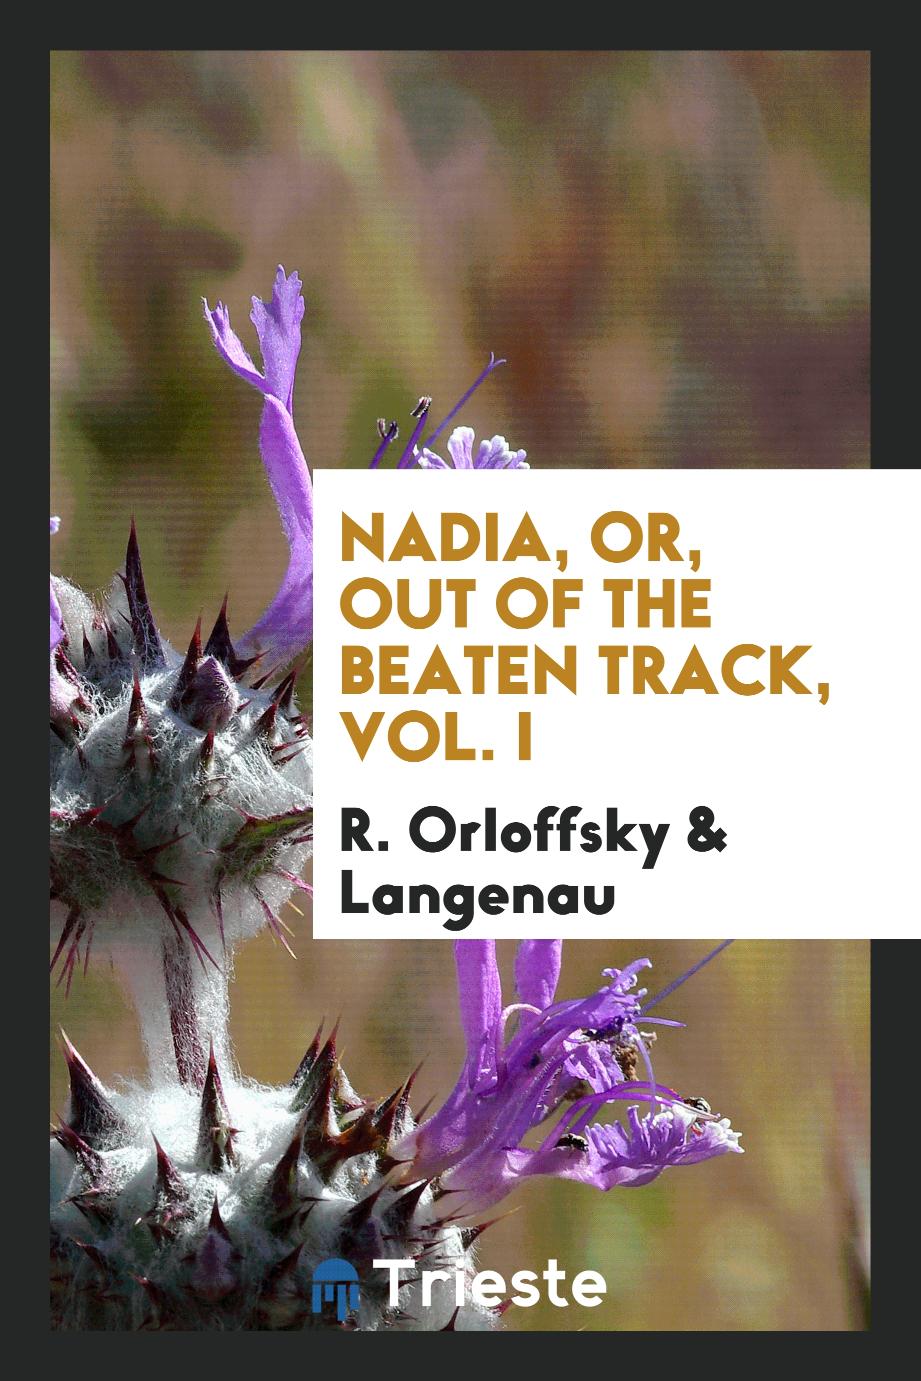 Nadia, Or, Out of the Beaten Track, Vol. I